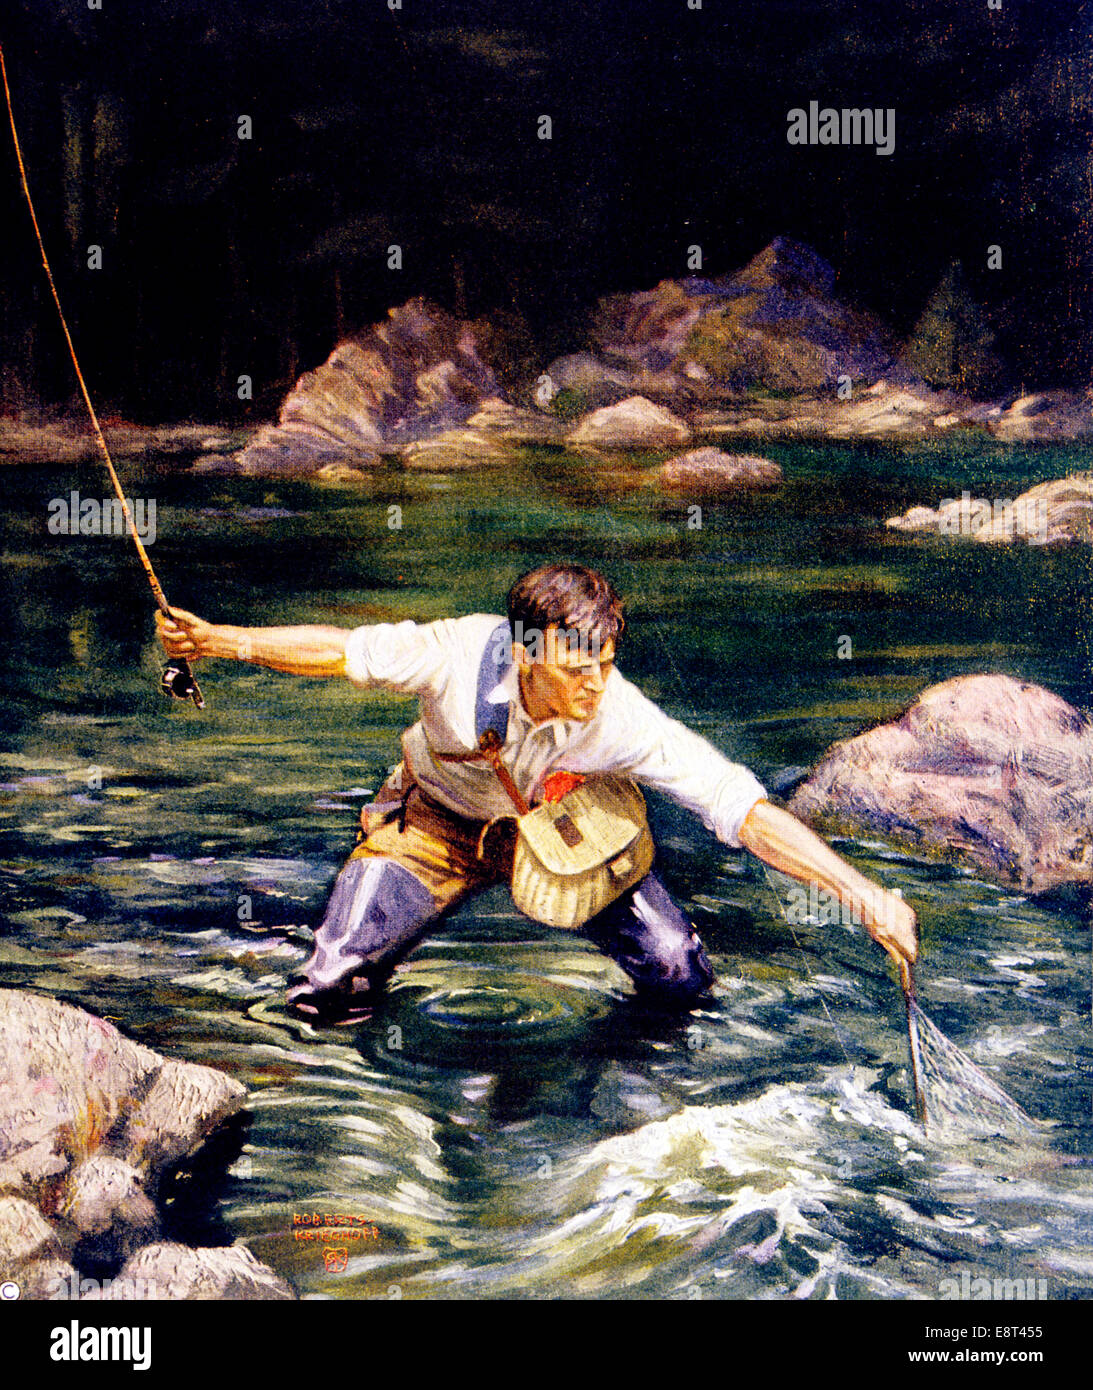 1920s COVER SUNDAY MAGAZINE LANDING THE TROUT MAN FISHING IN STREAM NETTING  HIS CATCH Stock Photo - Alamy